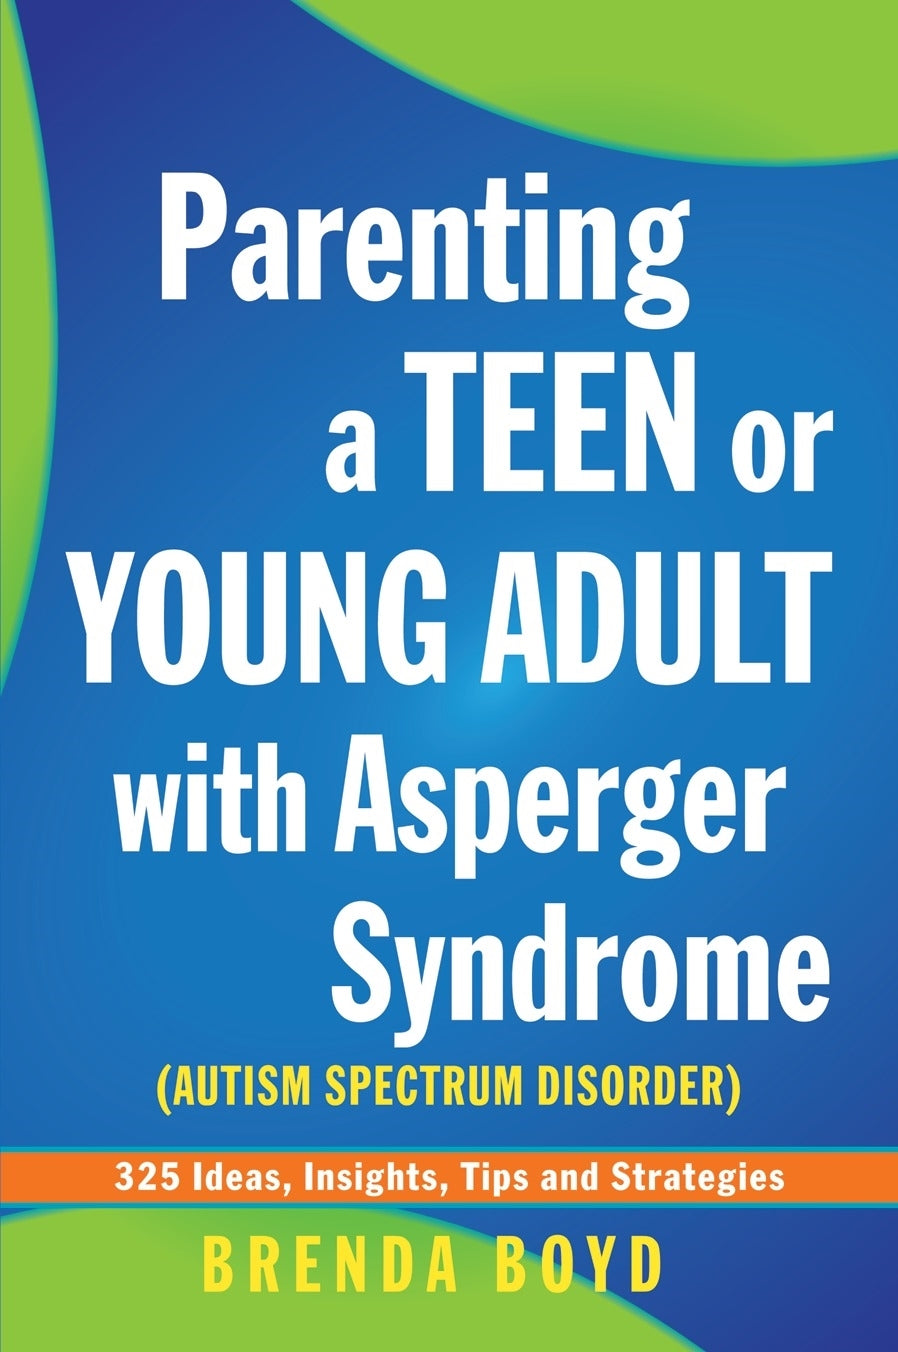 Parenting a Teen or Young Adult with Asperger Syndrome (Autism Spectrum Disorder) by Brenda Boyd